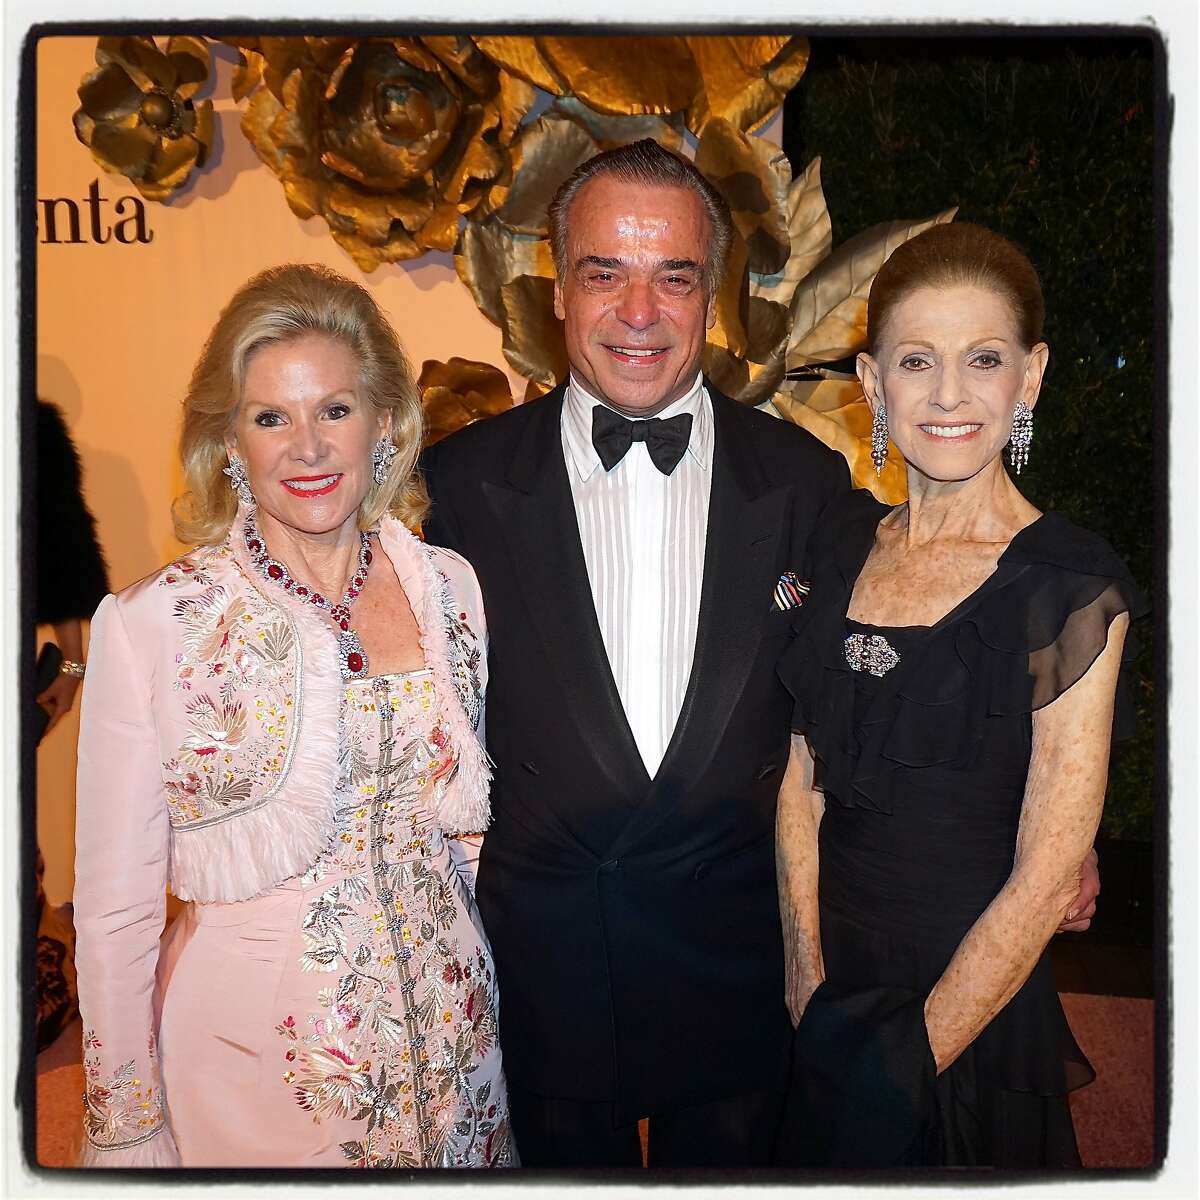 Fine Arts Museums Board President Dede Wilsey (left) with Boaz Mazor and Annette de la Renta at the "Oscar" exhibition gala at the de Young. March 2016.